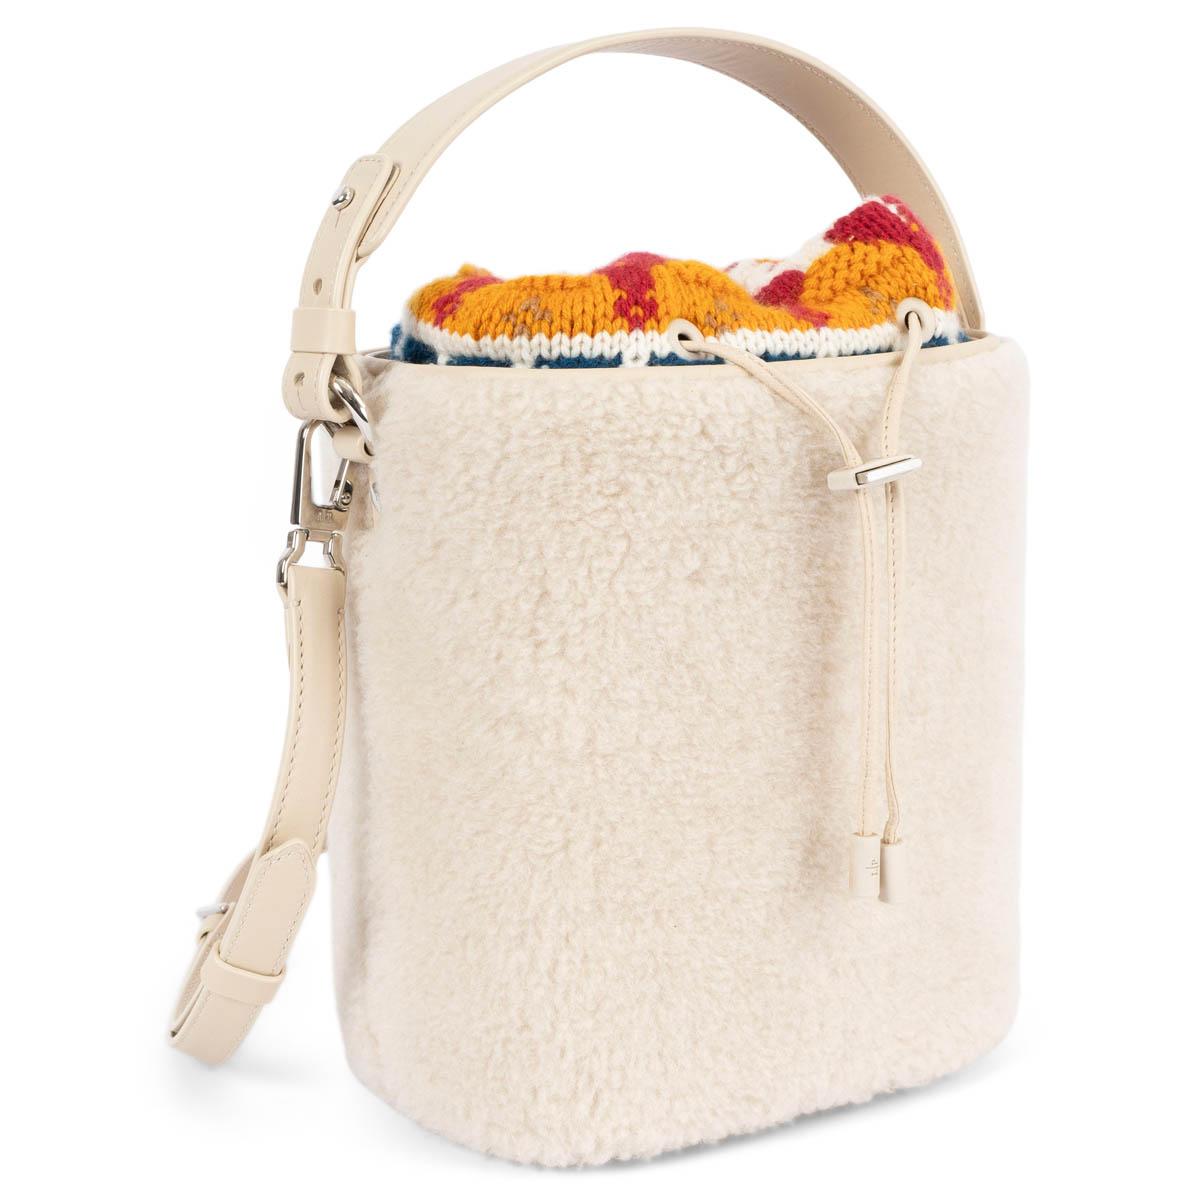 100% authentic Loro Piana Artemis bucket bag in ivory fluffy shearling with tonal leather trims. The design features an ivory, orange, red and blue knitted removable interior pouch, lined in smooth nappa leather with drawstring closure. The top